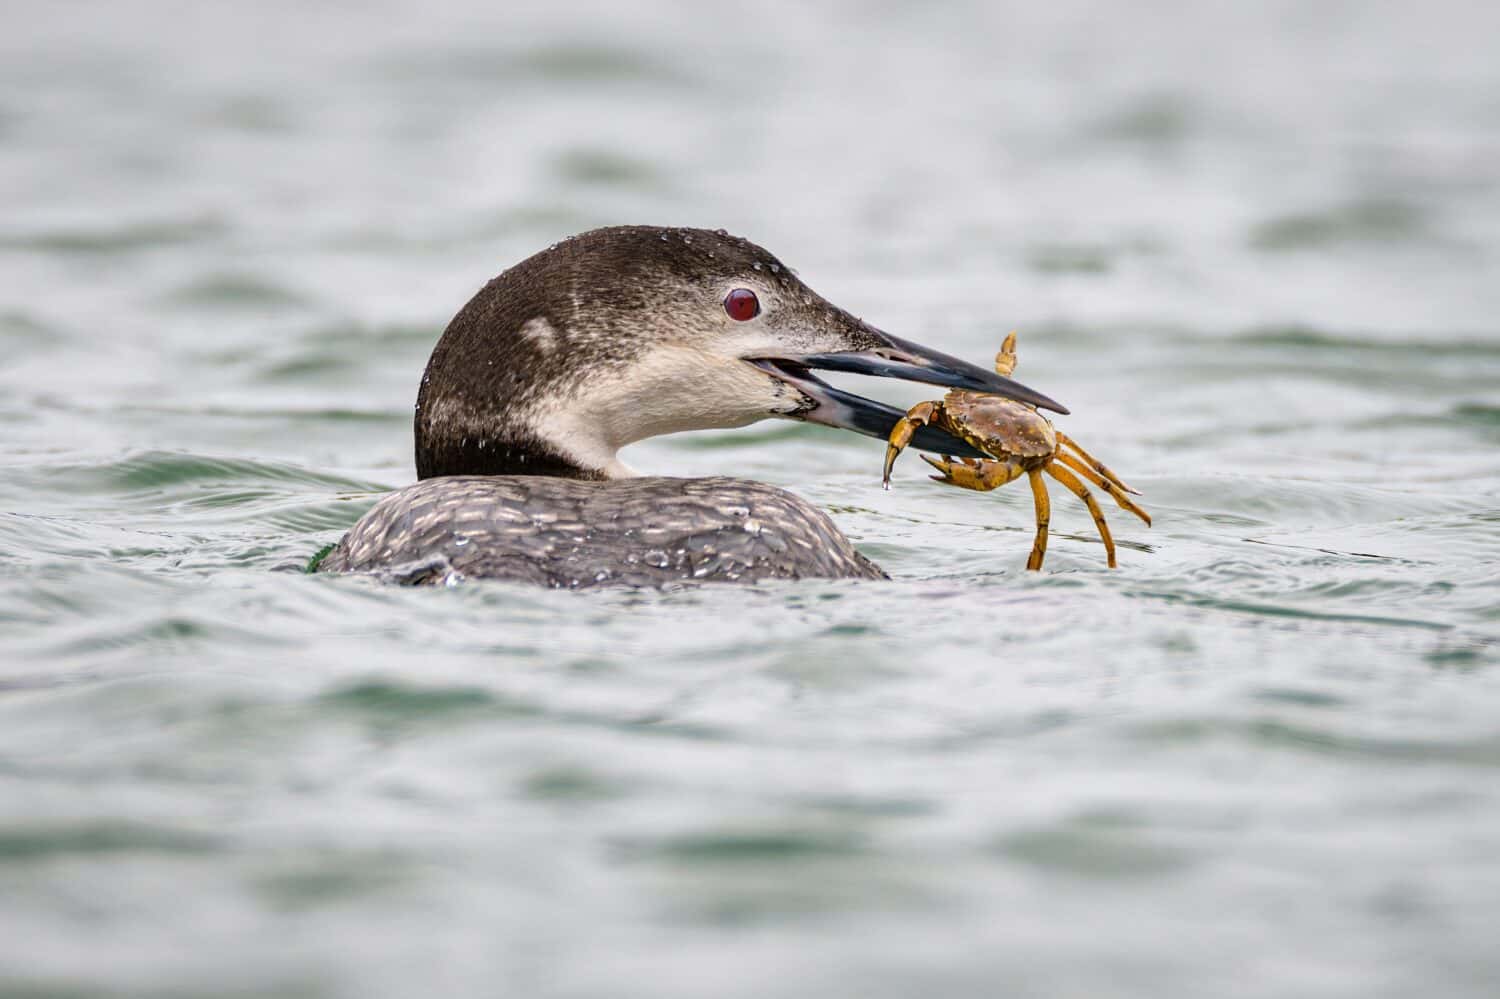 Common Loon looking at camera with crab in its mouth